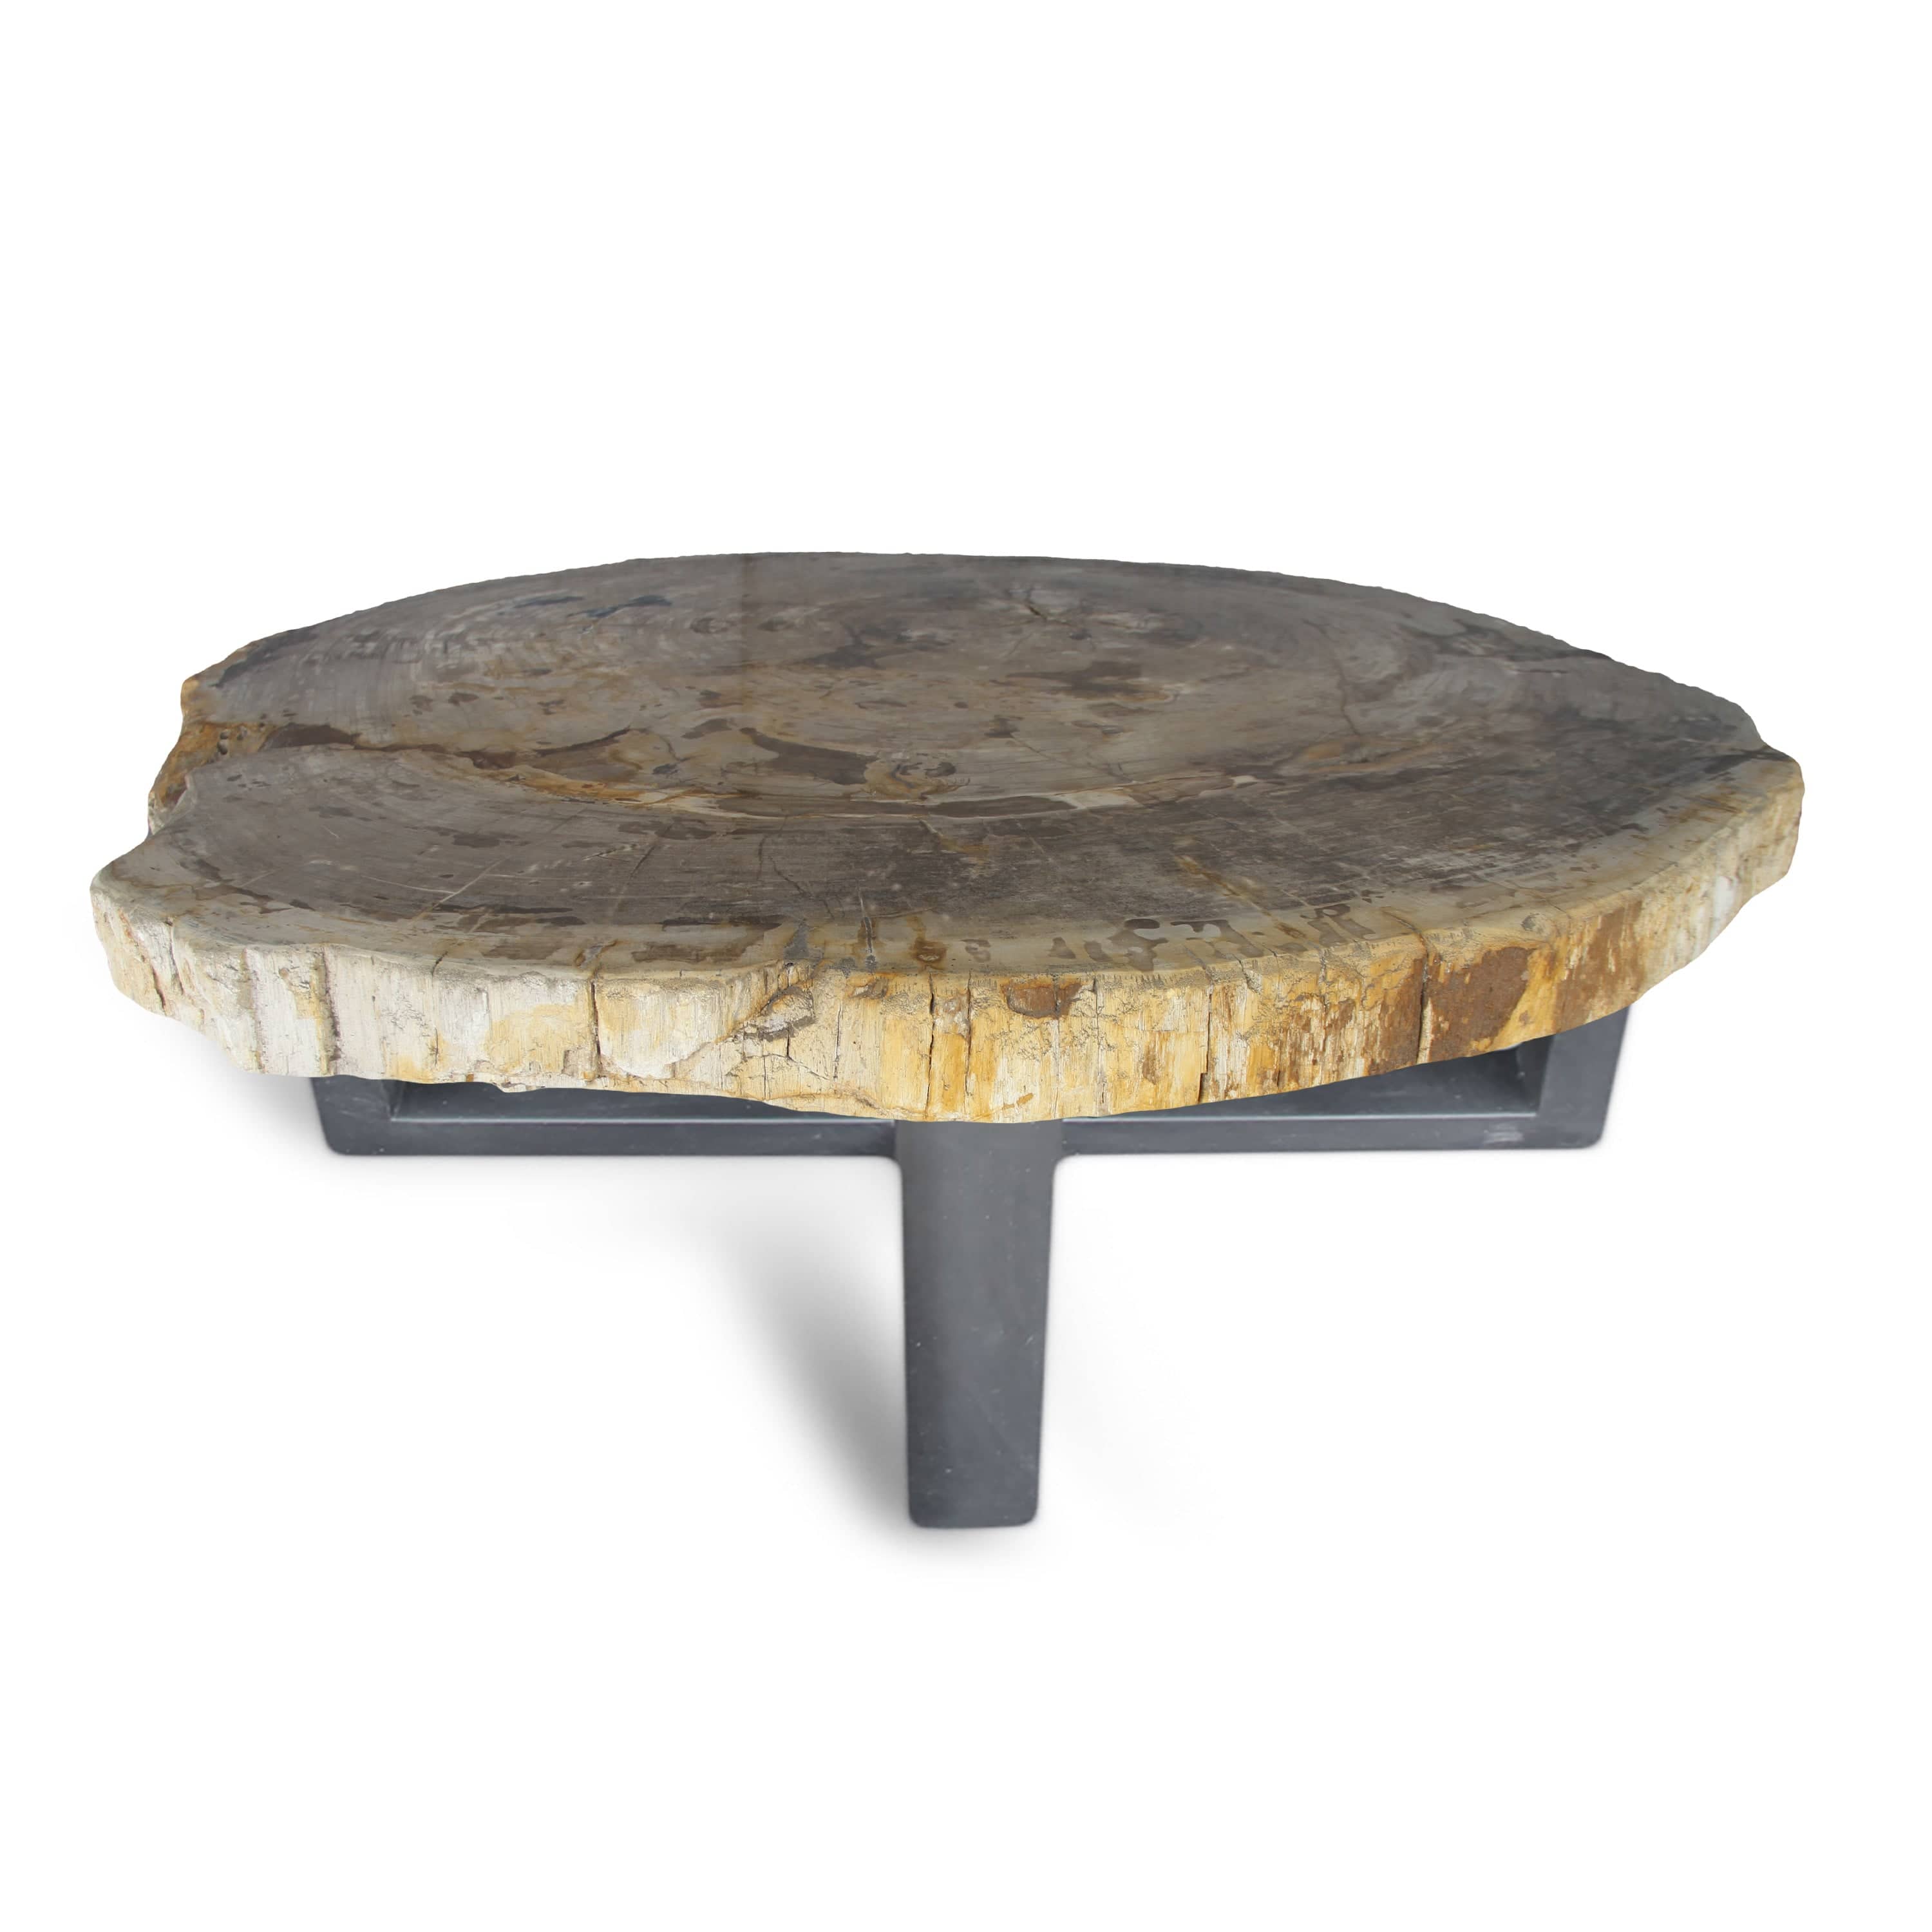 Kalifano Petrified Wood Petrified Wood Round Slab Coffee Table from Indonesia - 45" / 381 lbs PWT14000.002